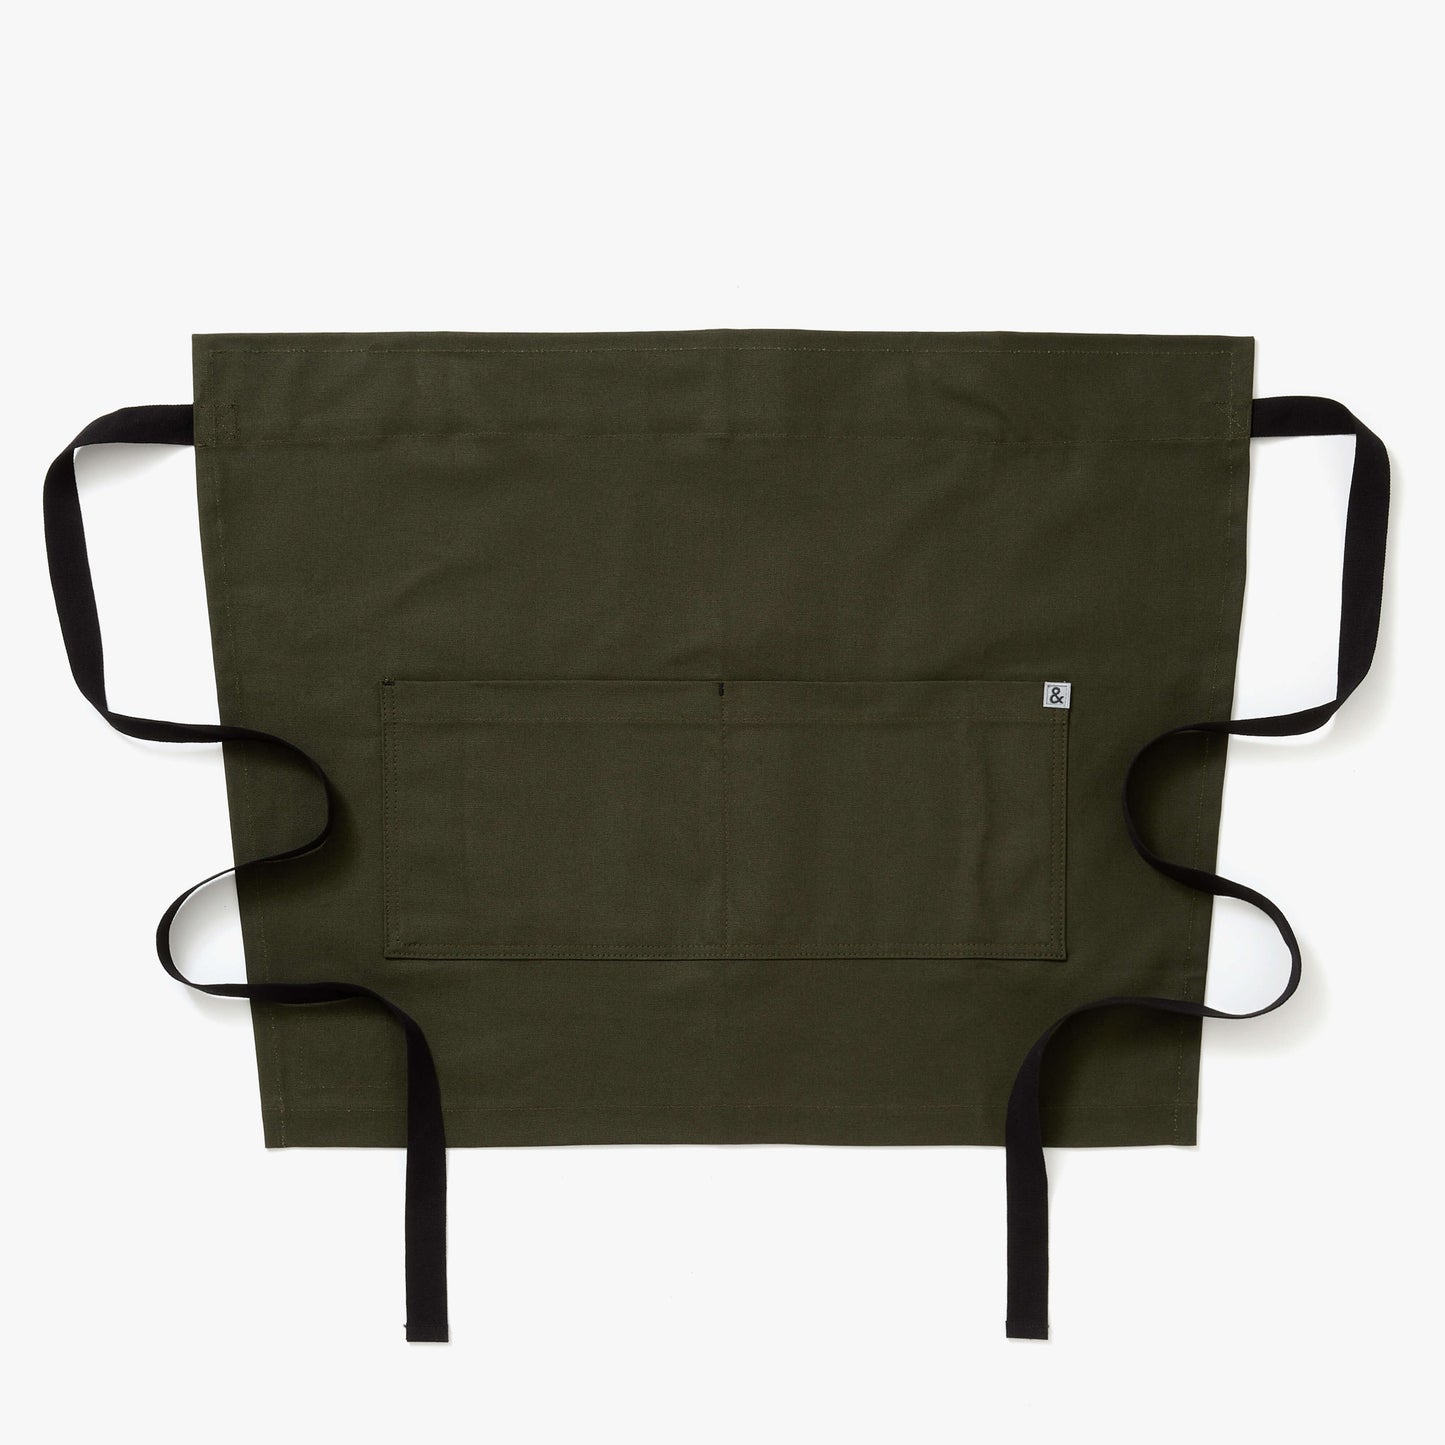 The Cafe Bistro Apron - Olive Green